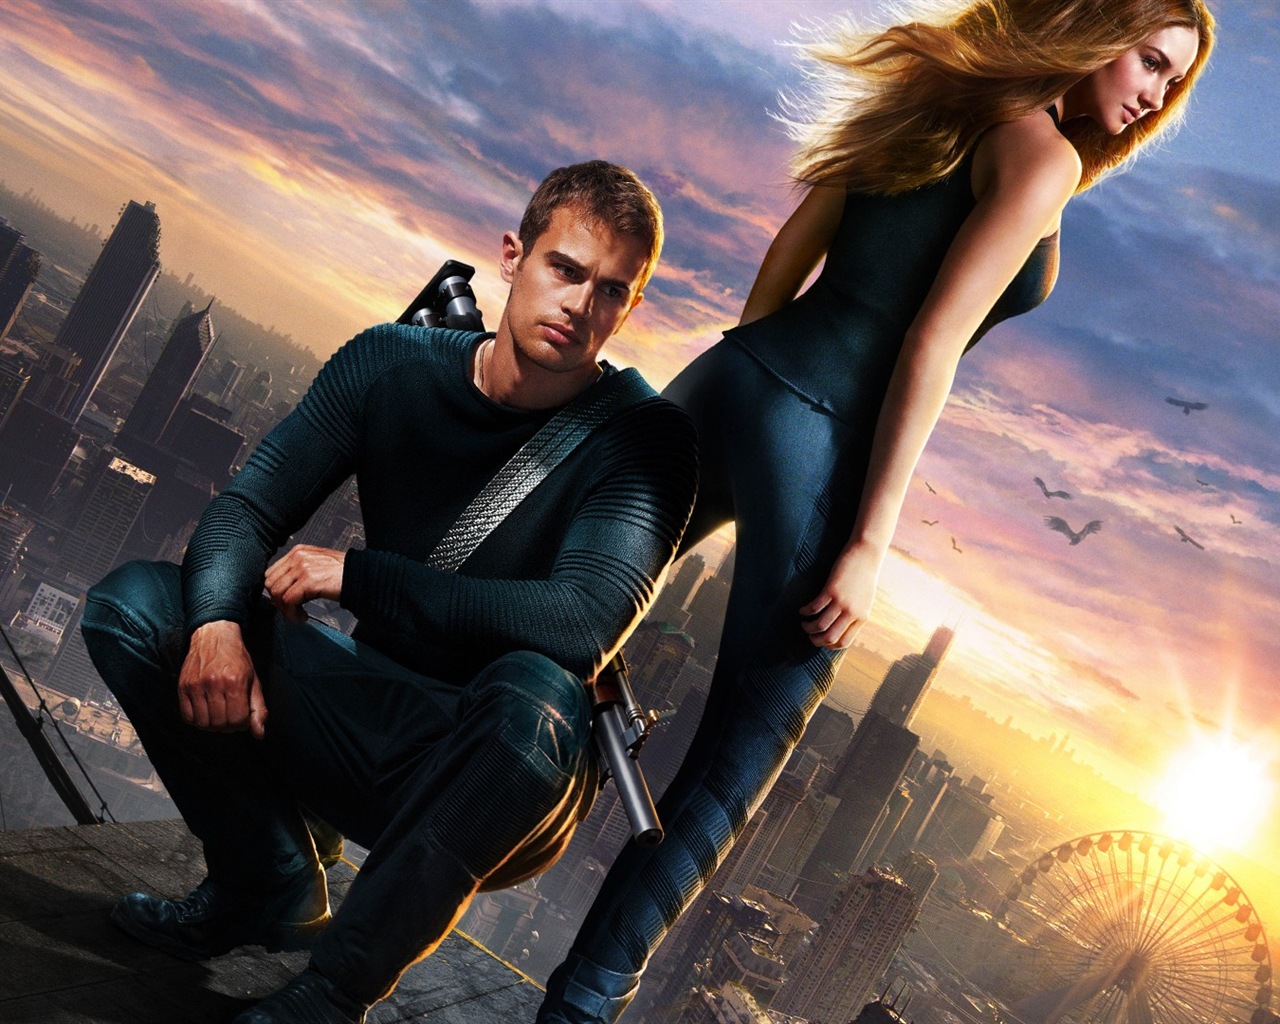 Divergent movie HD wallpapers #10 - 1280x1024